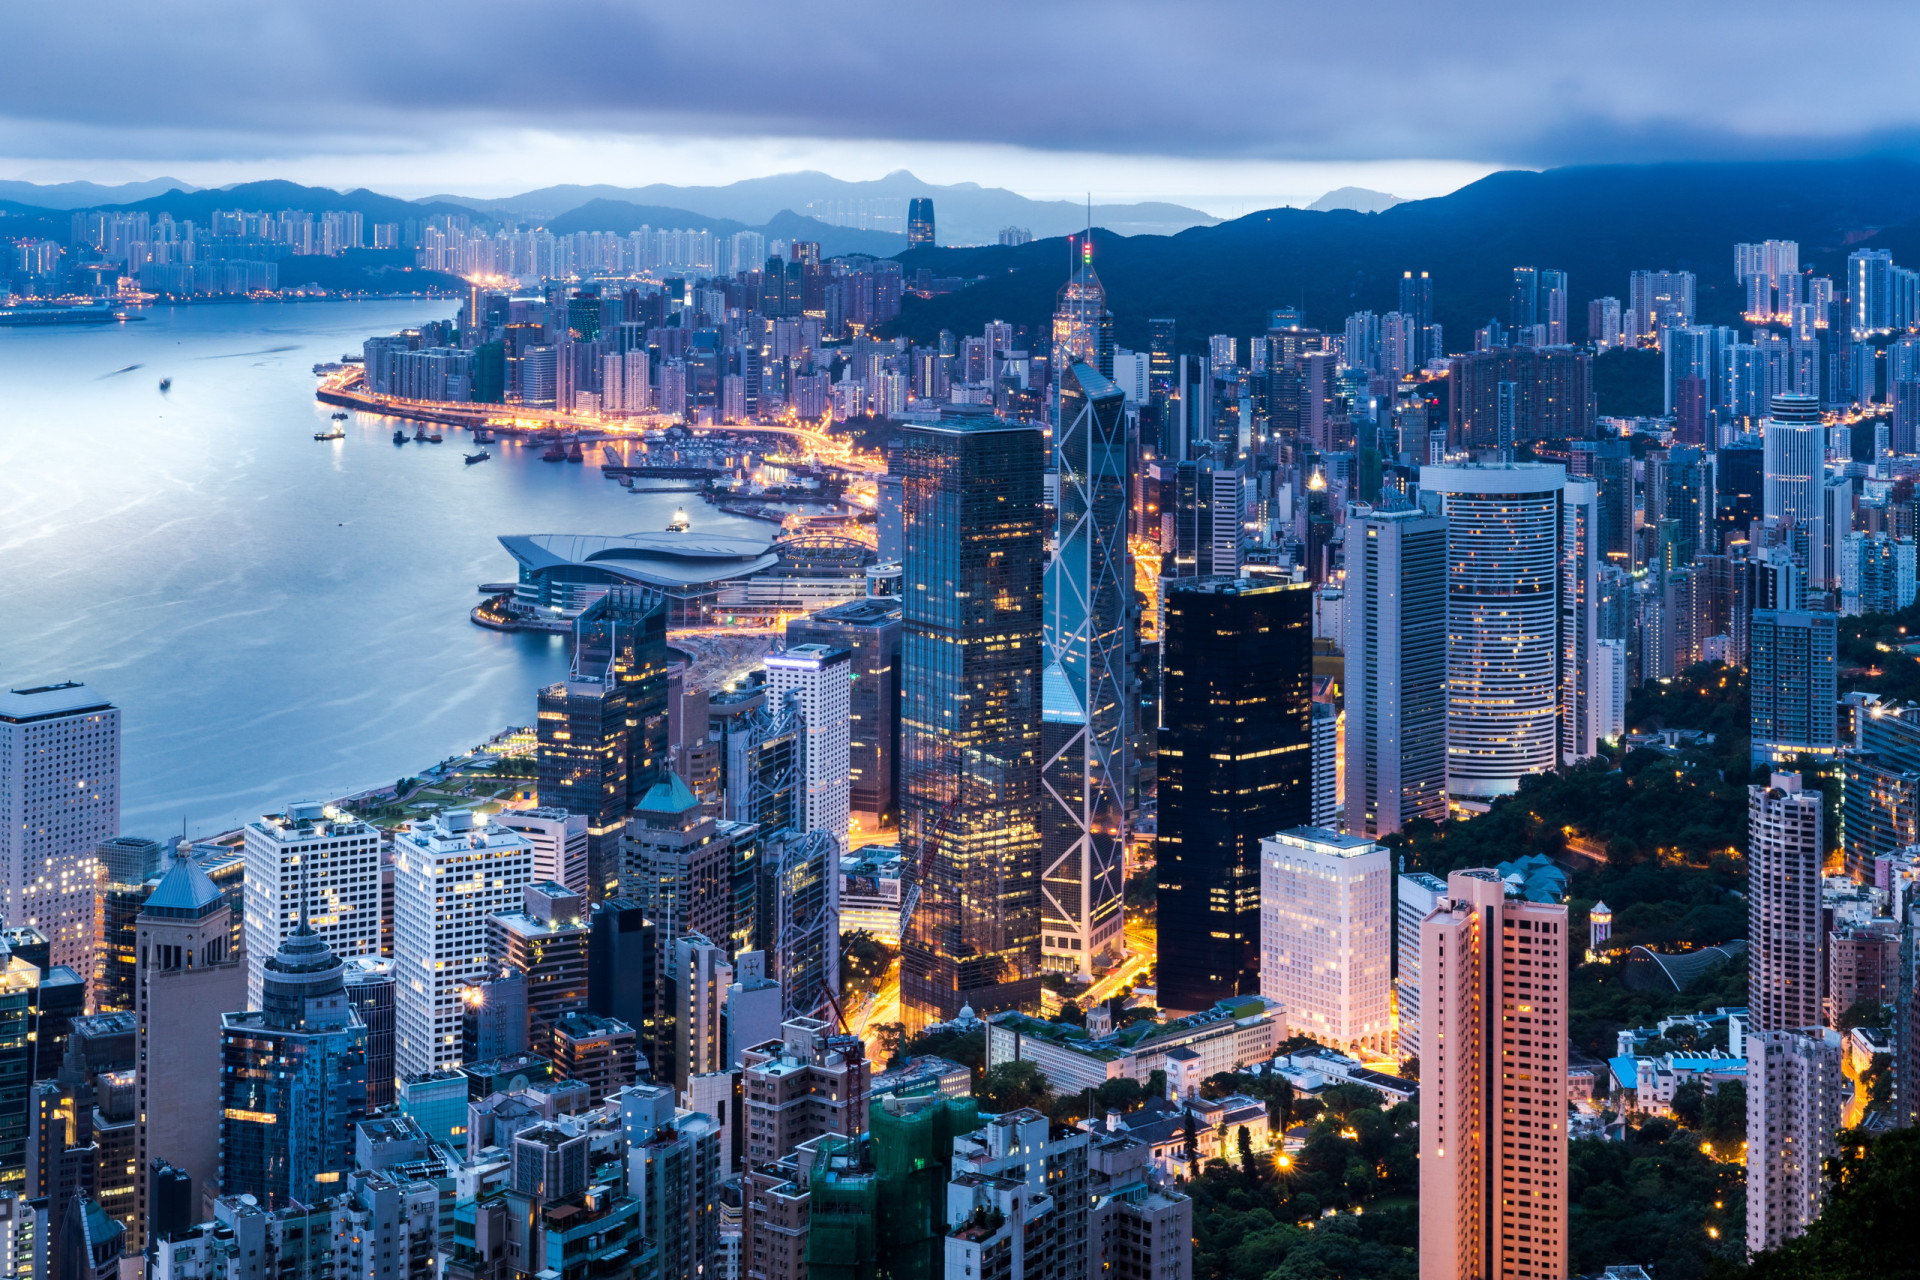 <p>Hong Kong, with a rent index of 64.1, is an East-meets-West metropolis. Known for its skyline and deep natural harbor, it's a financial giant where space is at a premium.</p><p>You may also like:<a href="https://www.starsinsider.com/n/225696?utm_source=msn.com&utm_medium=display&utm_campaign=referral_description&utm_content=651794en-in"> 30 books that influenced the world</a></p>